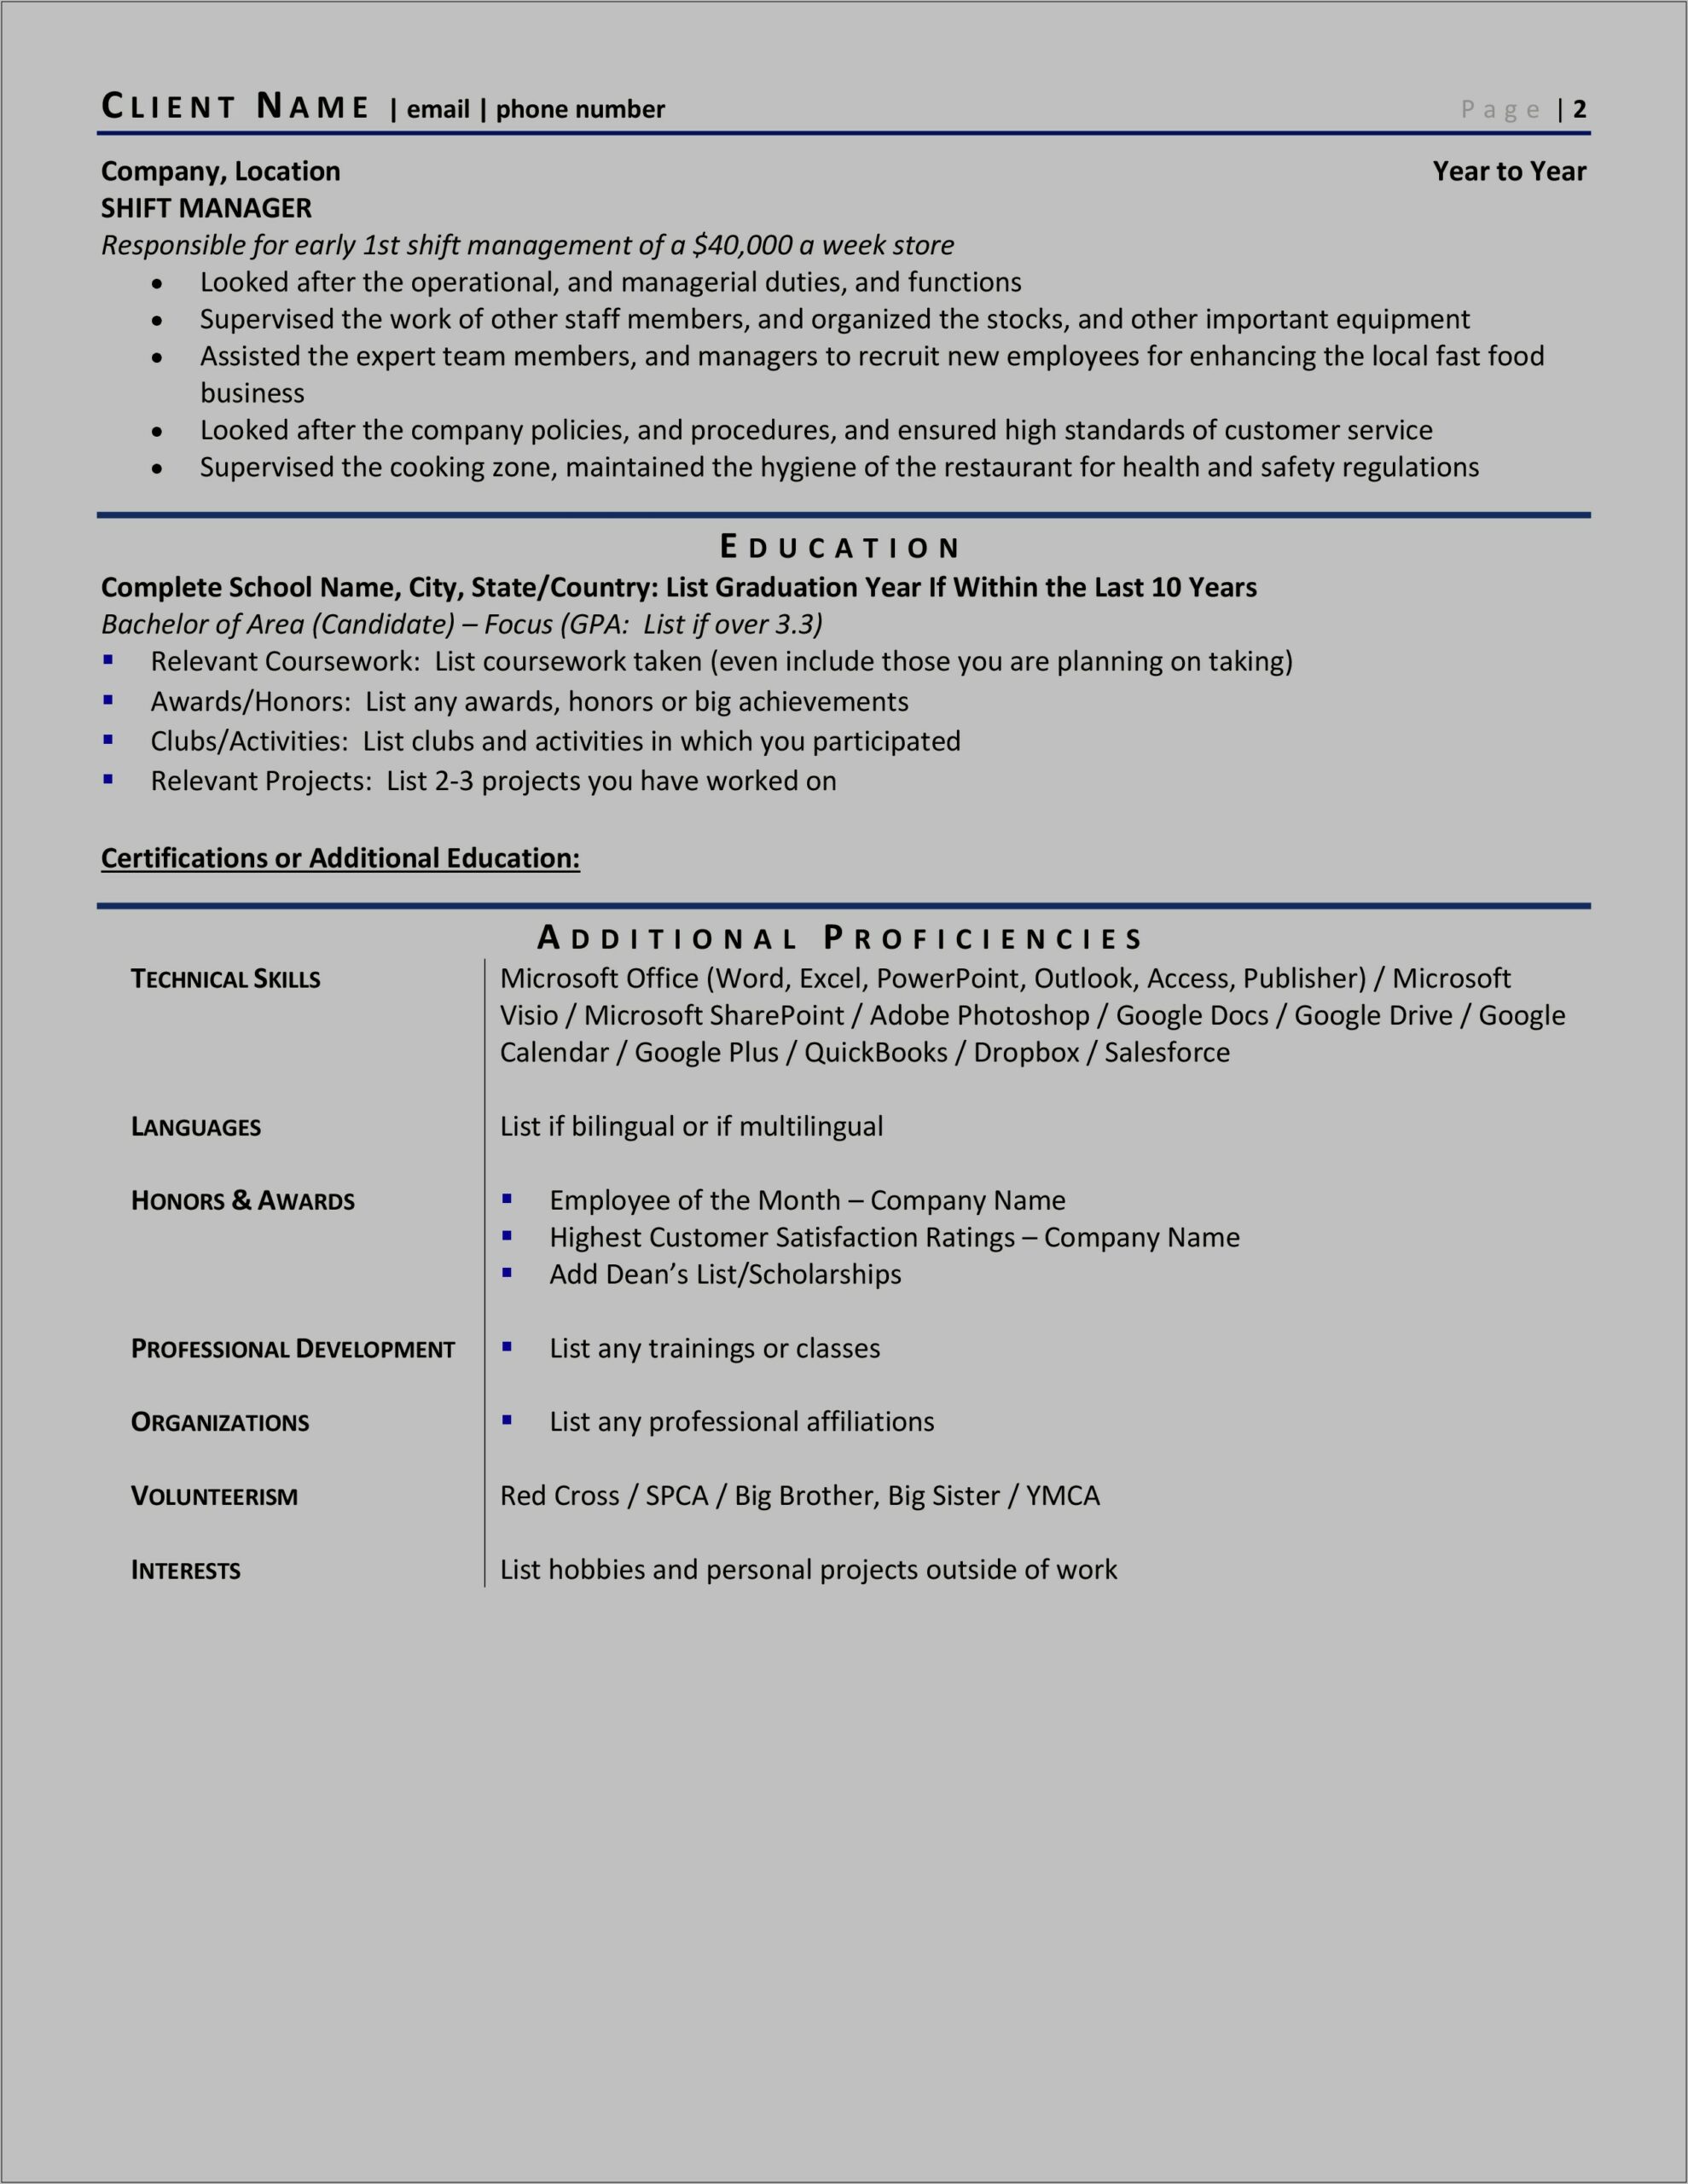 Job Less Than One Year On Resume